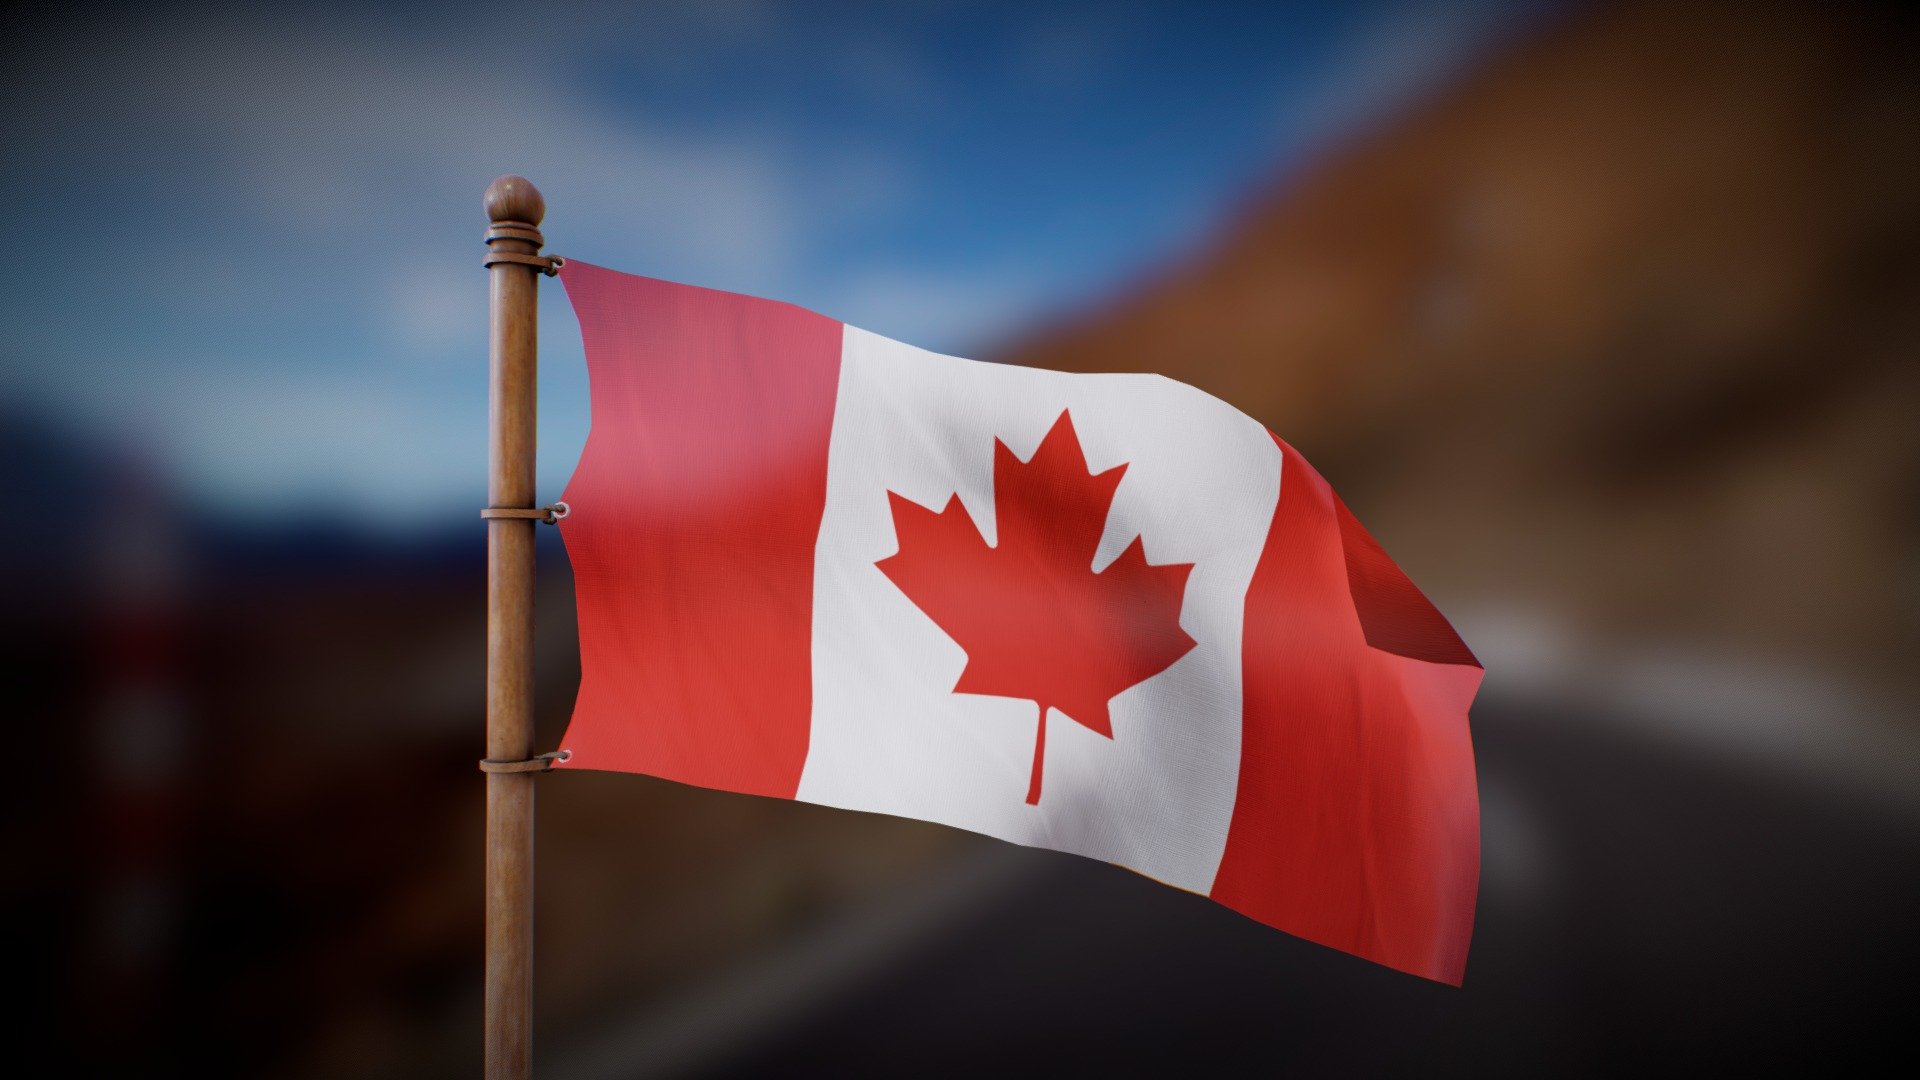 Flag waving in the wind in a looped animation

Joint Animation, perfect for any purpose
4K PBR textures

Feel free to DM me for anu question of custom requests :) - Canada Flag - Wind Animated Loop - Buy Royalty Free 3D model by Deftroy 3d model